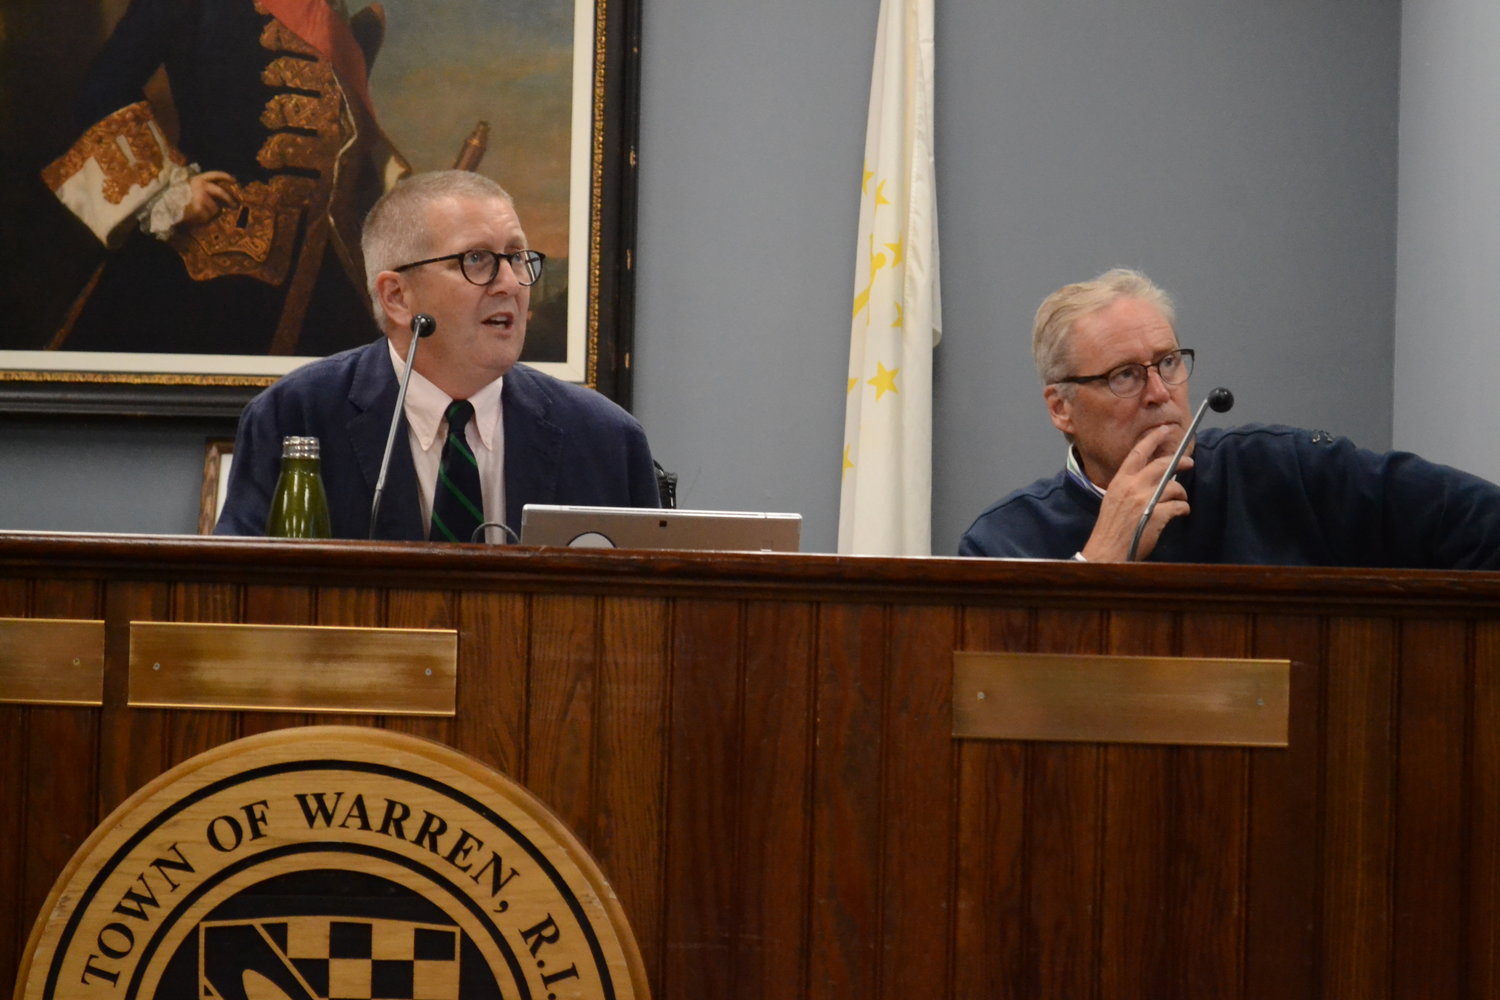 Town Planner Bob Rulli (right), with Arnold Robinson, Regional Director of Planning for Fuss & O’Neill, during a public meeting session on the Market to Metacom redevelopment plan in September of 2021.